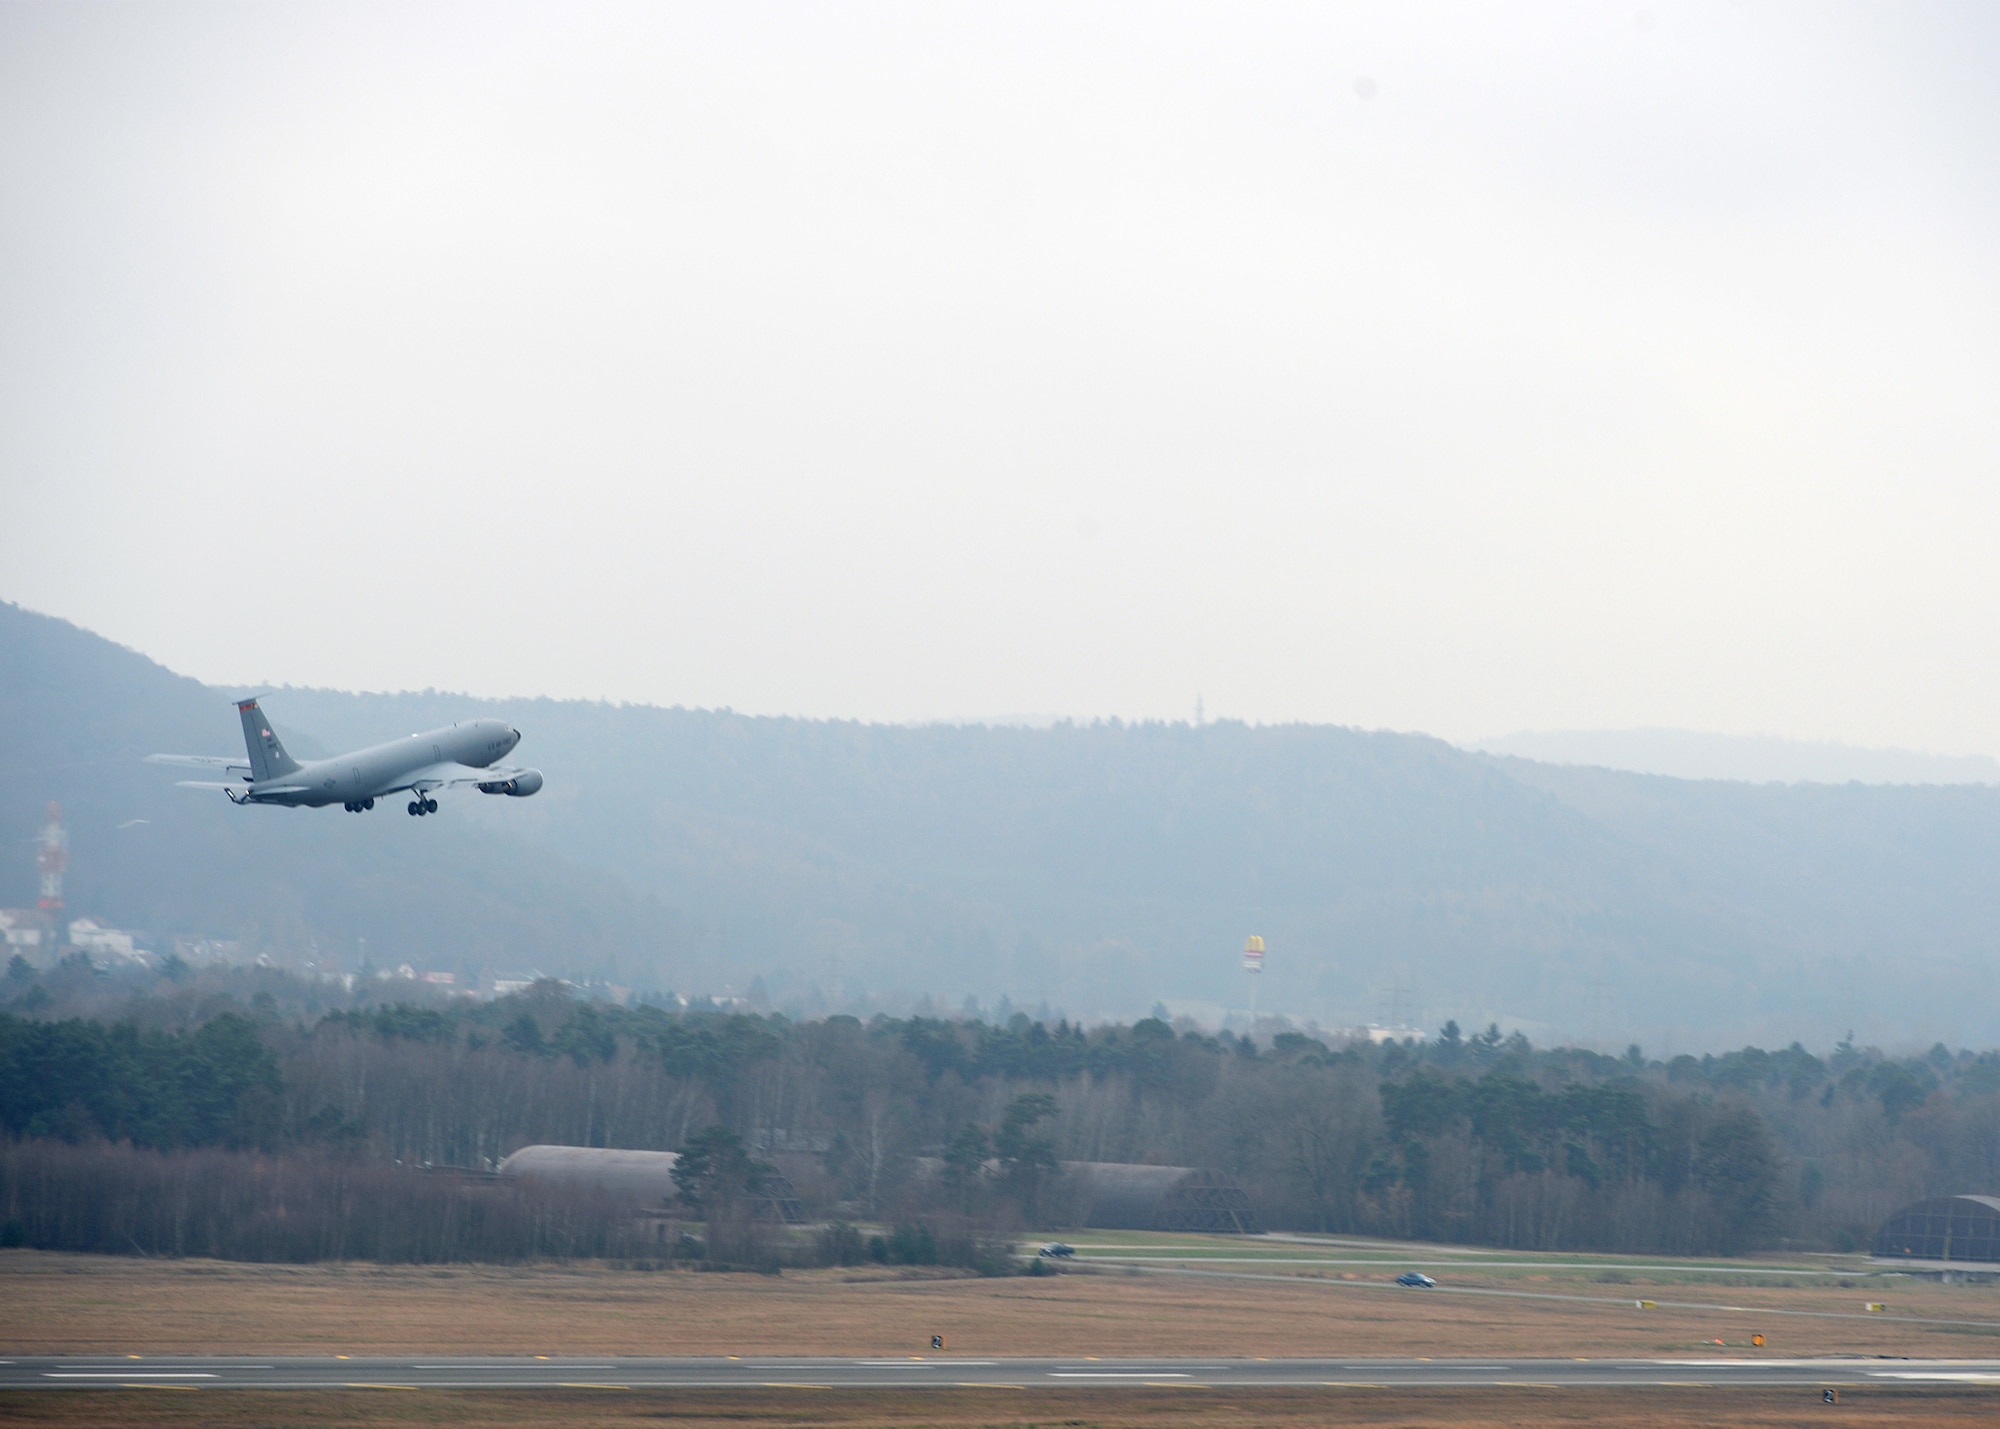 A KC-135 Stratotanker takes off from Ramstein Air Base, Dec. 12, 2016. Air traffic controllers are responsible for managing aircraft throughout their flights and guiding them through their respective air spaces. (U.S. Air Force photo by Senior Airman Jimmie D. Pike)